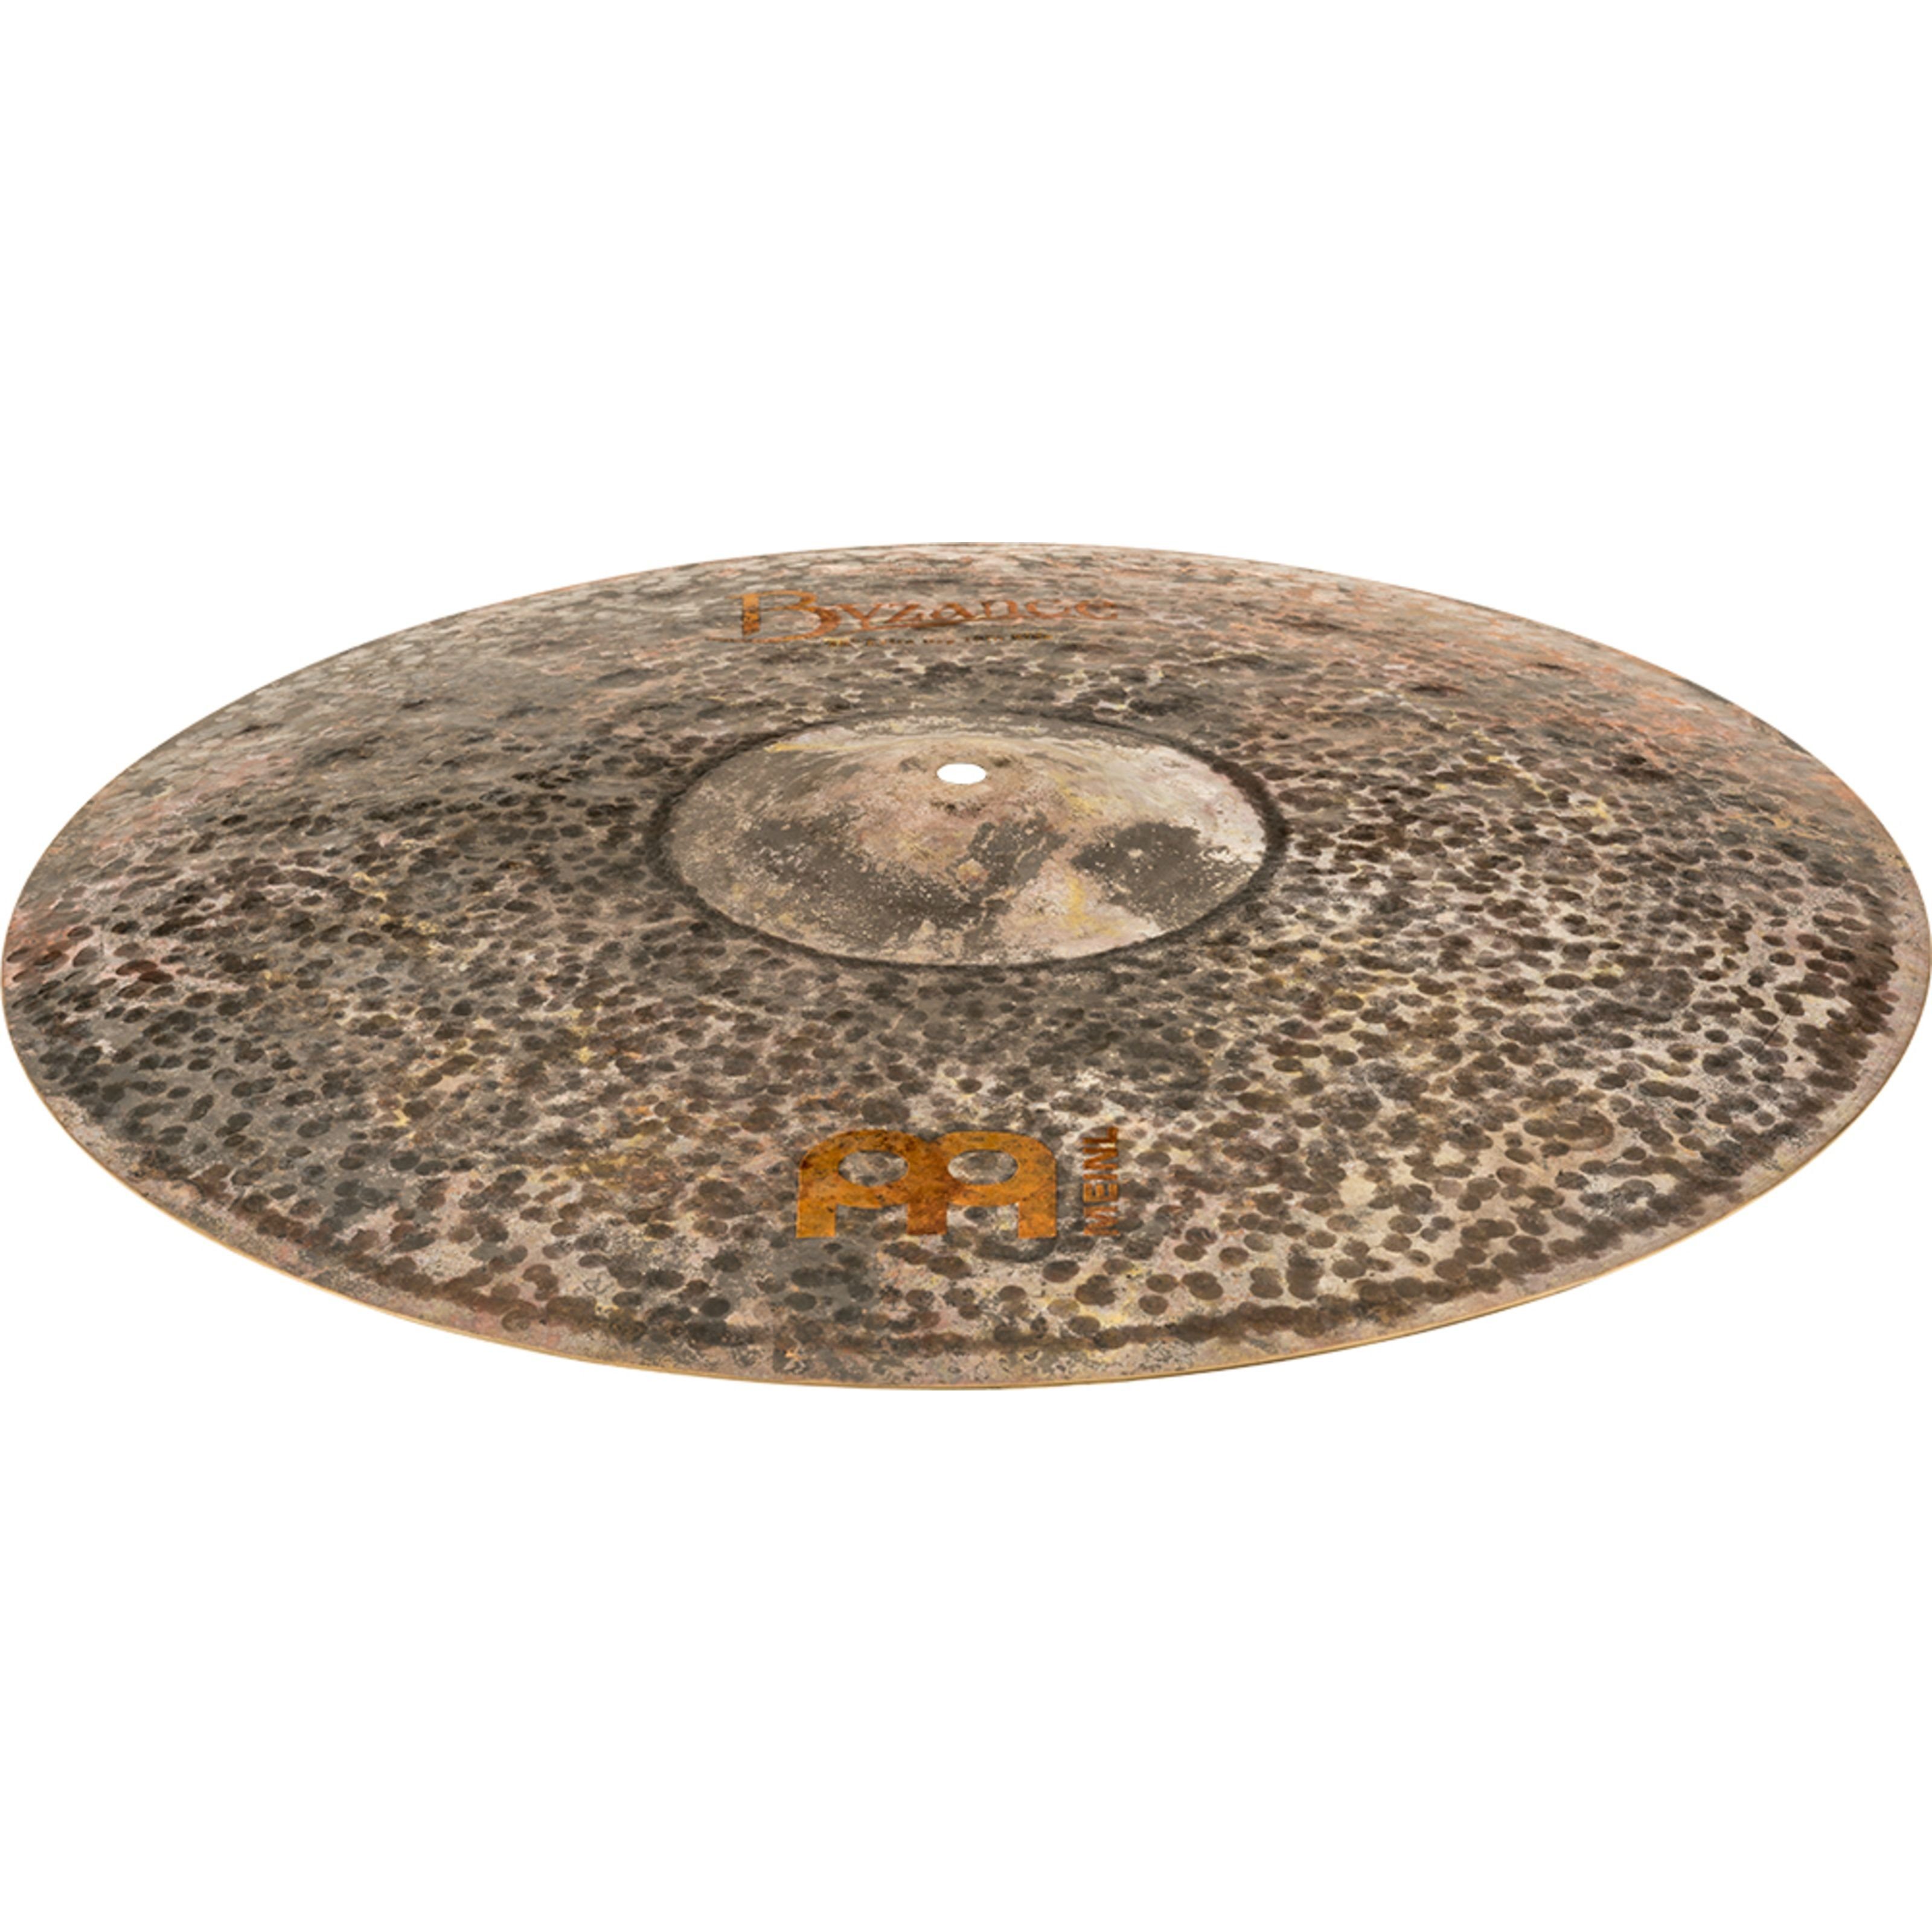 Ride 20", Spielzeug-Musikinstrument, Cymbal Byzance Extra Percussion B20EDTR, - Dry Ride Thin Meinl